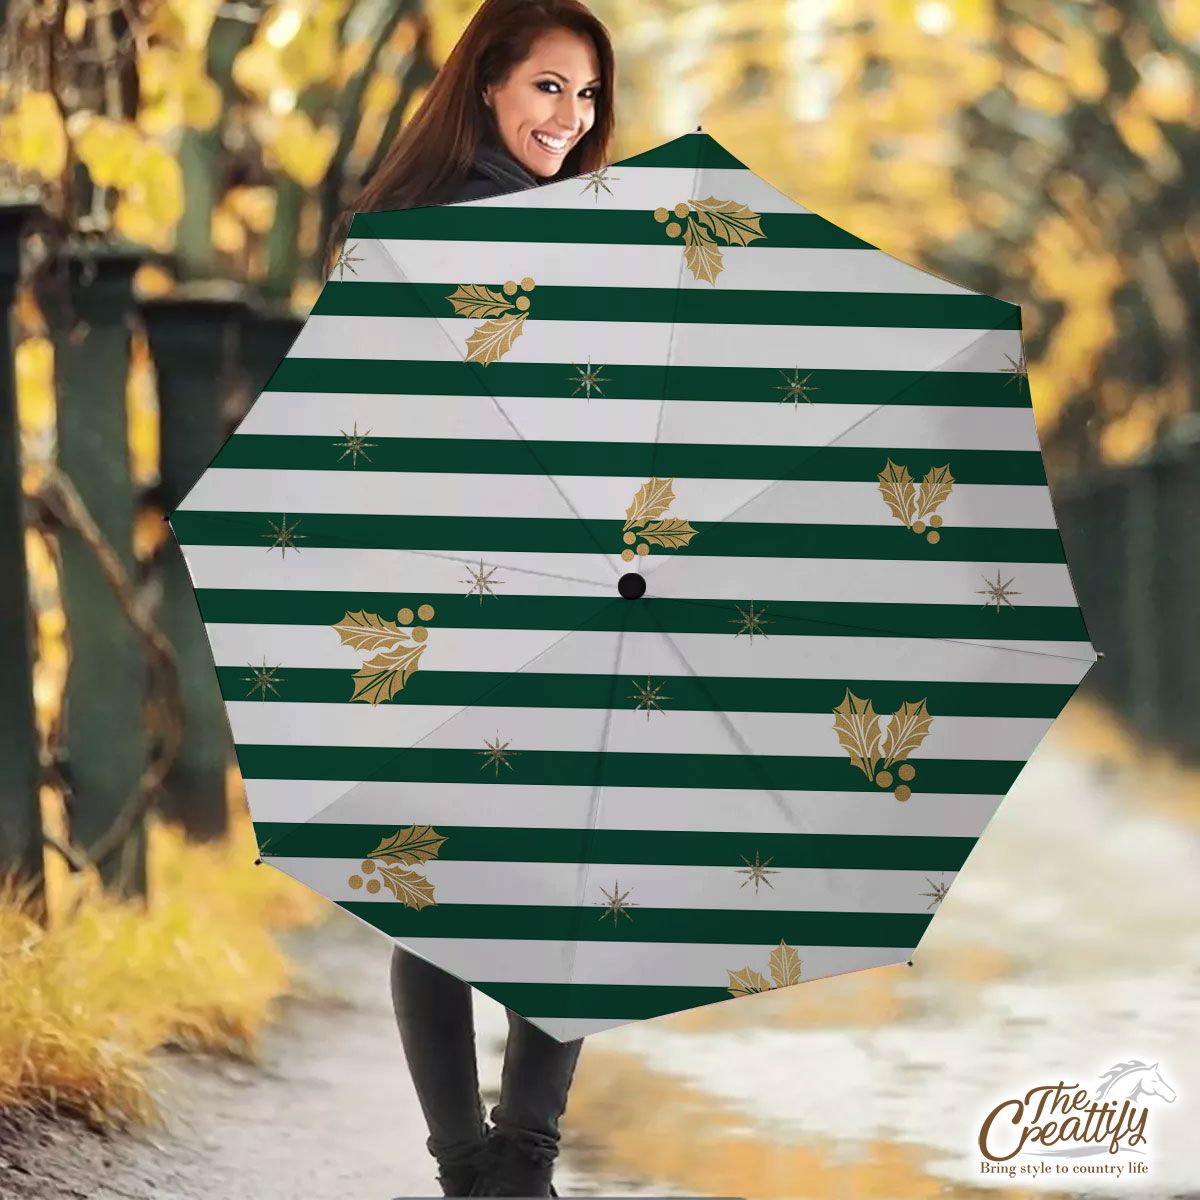 Holly Leaf On Green And White Stripe Umbrella